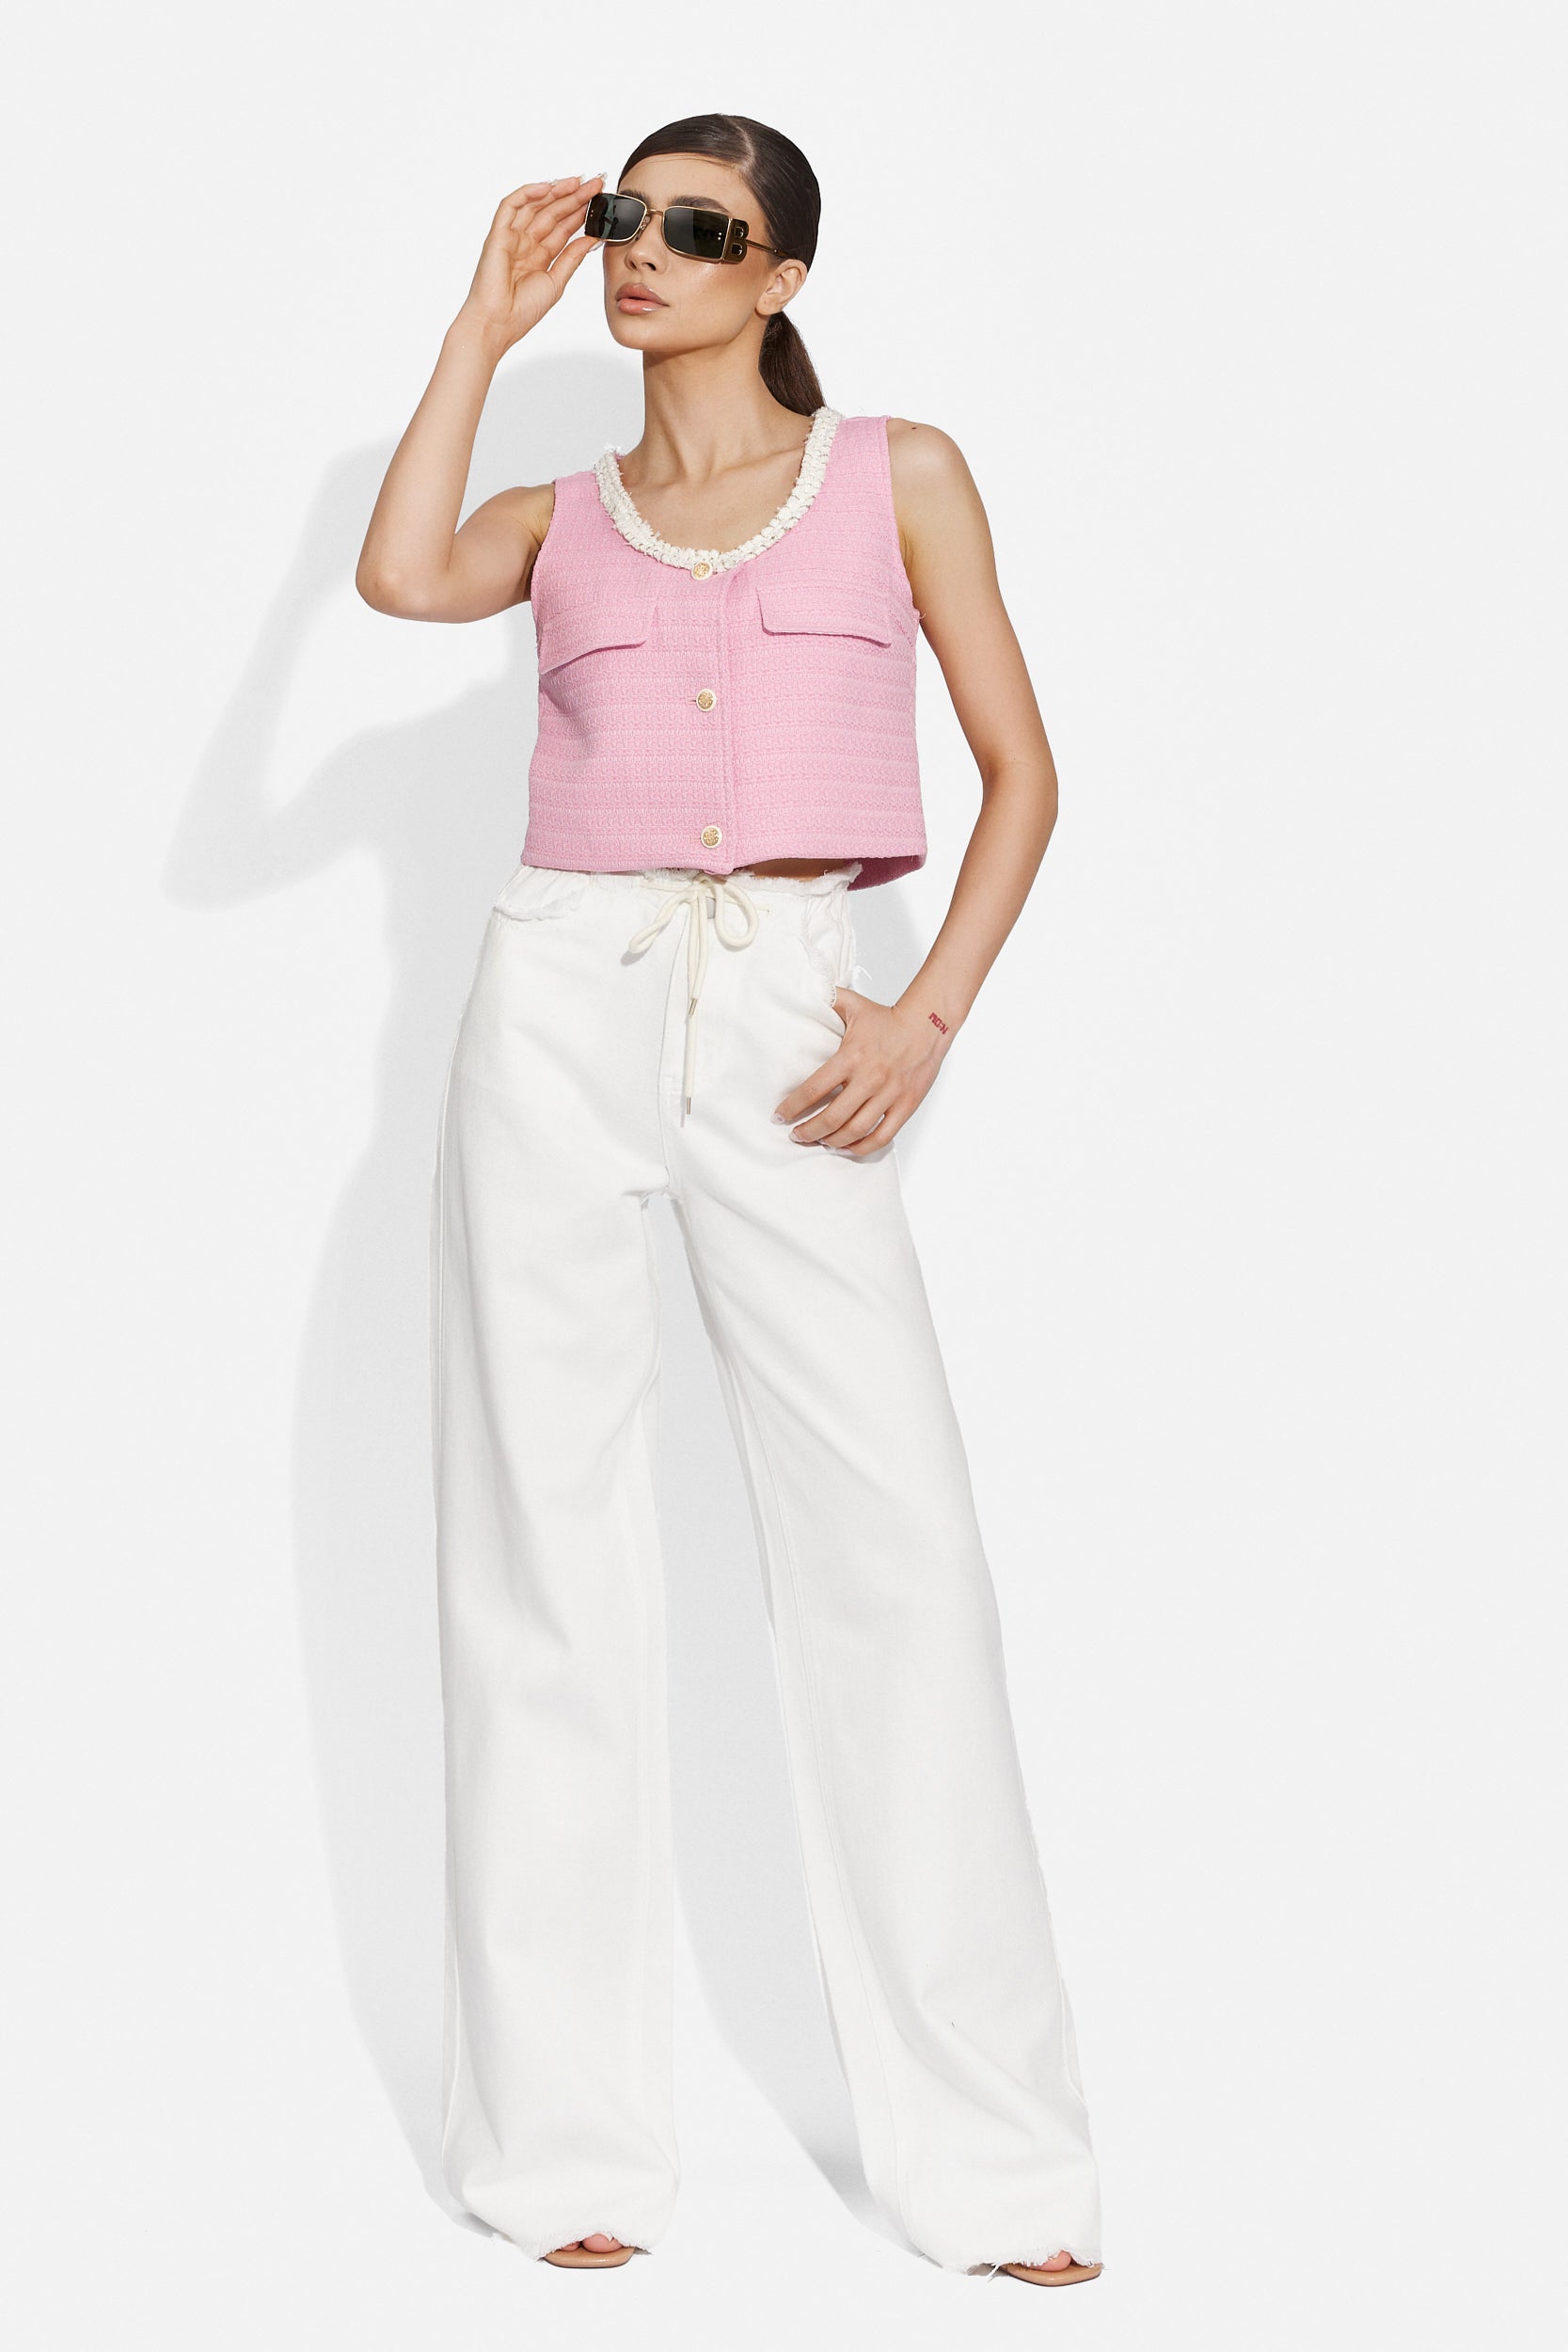 Liviana Bogas casual white jeans for women